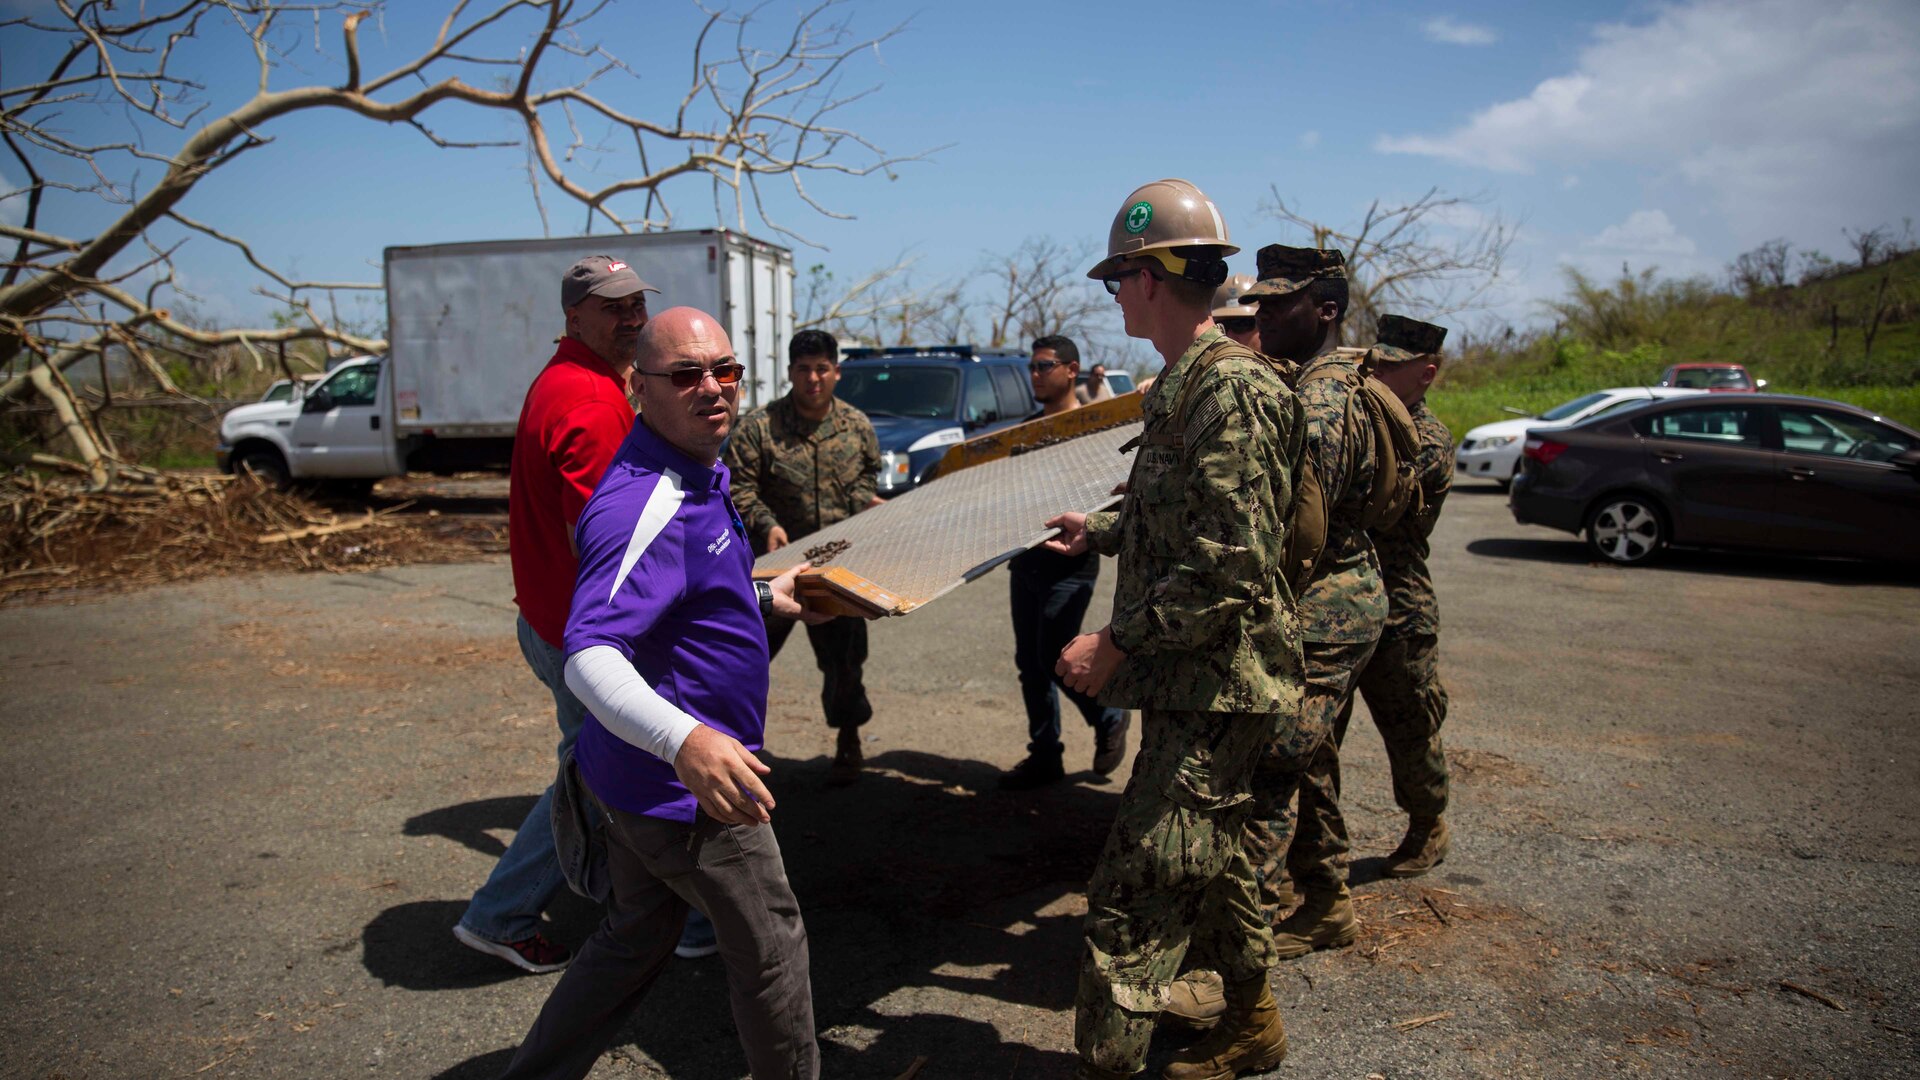 The 26th MEU is supporting Federal Emergency Management Agency, the lead federal agency, in helping those affected by Hurricane Maria to minimize suffering and is one component of the overall whole-of-government response effort.